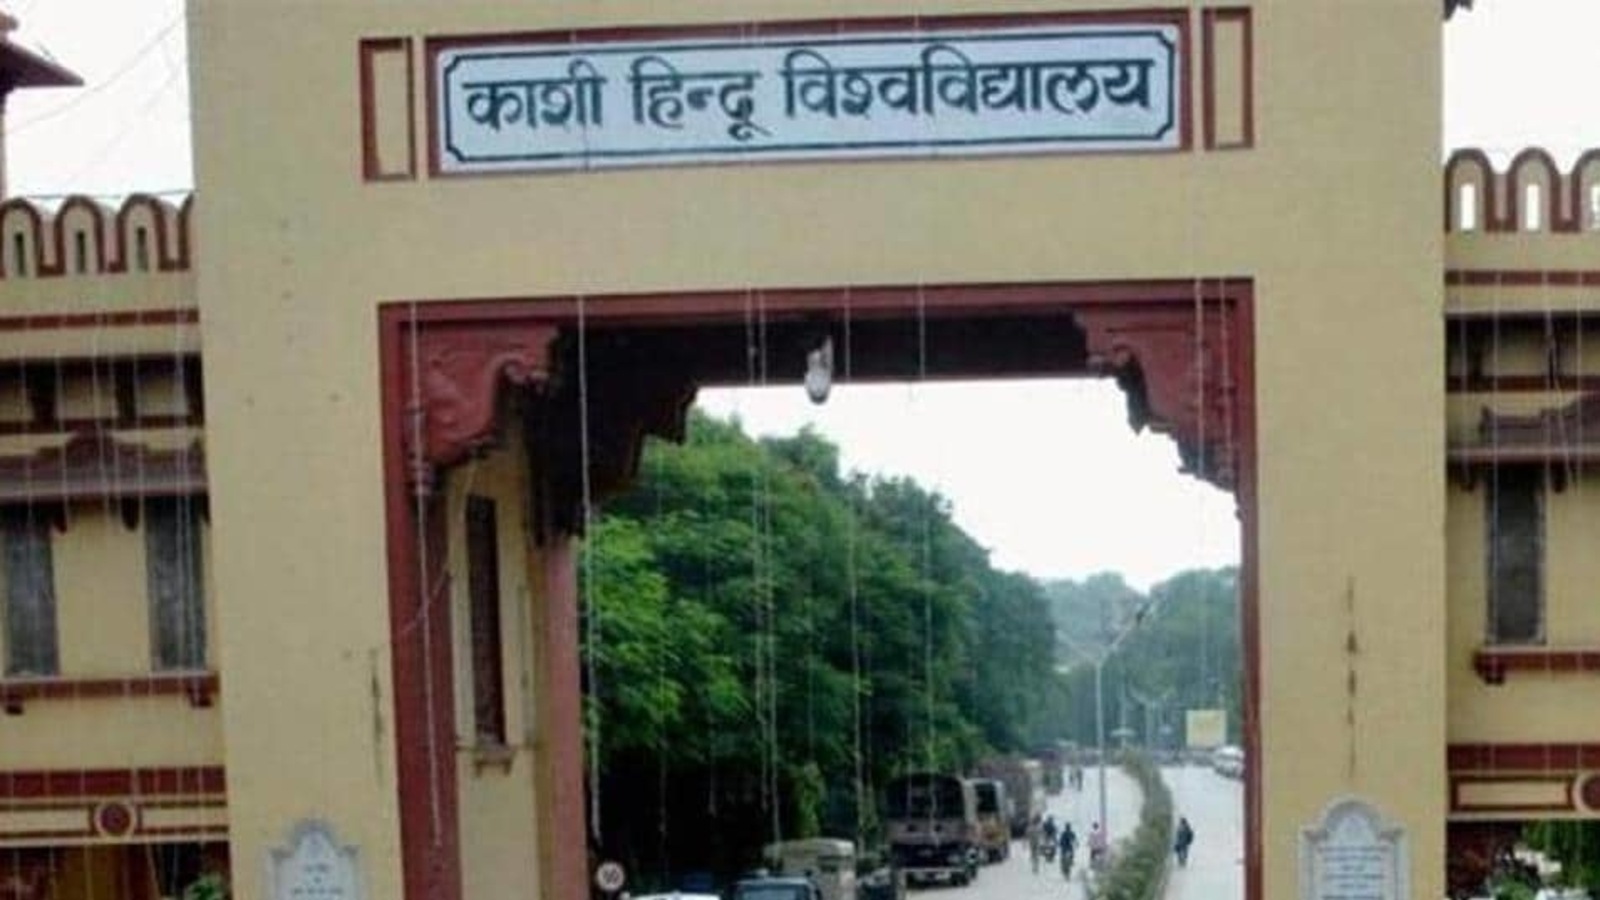 BHU entrance exam schedule for UG, PG courses 2021-22 announced